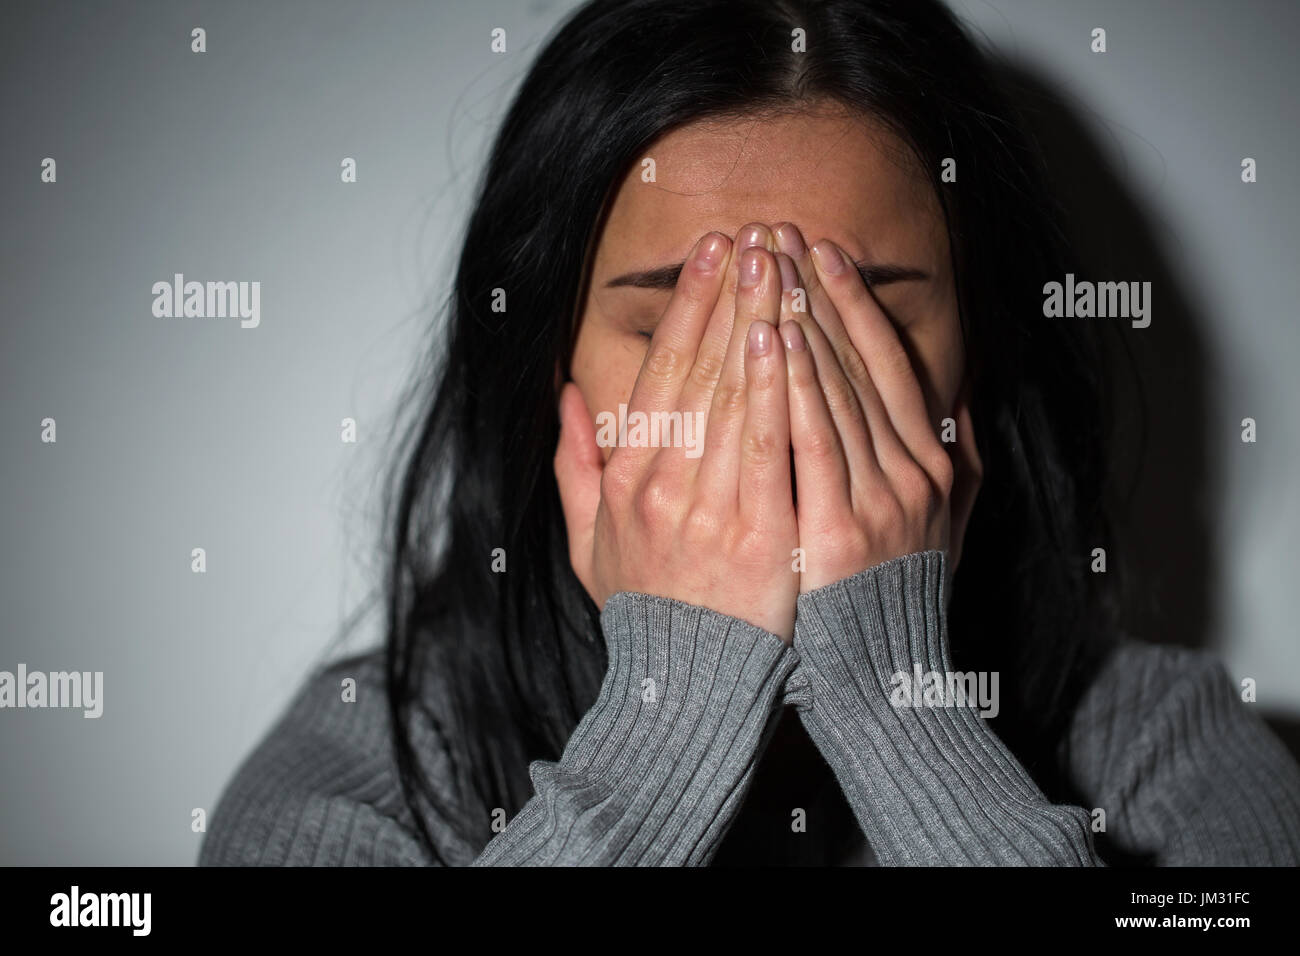 close up of unhappy crying woman Stock Photo